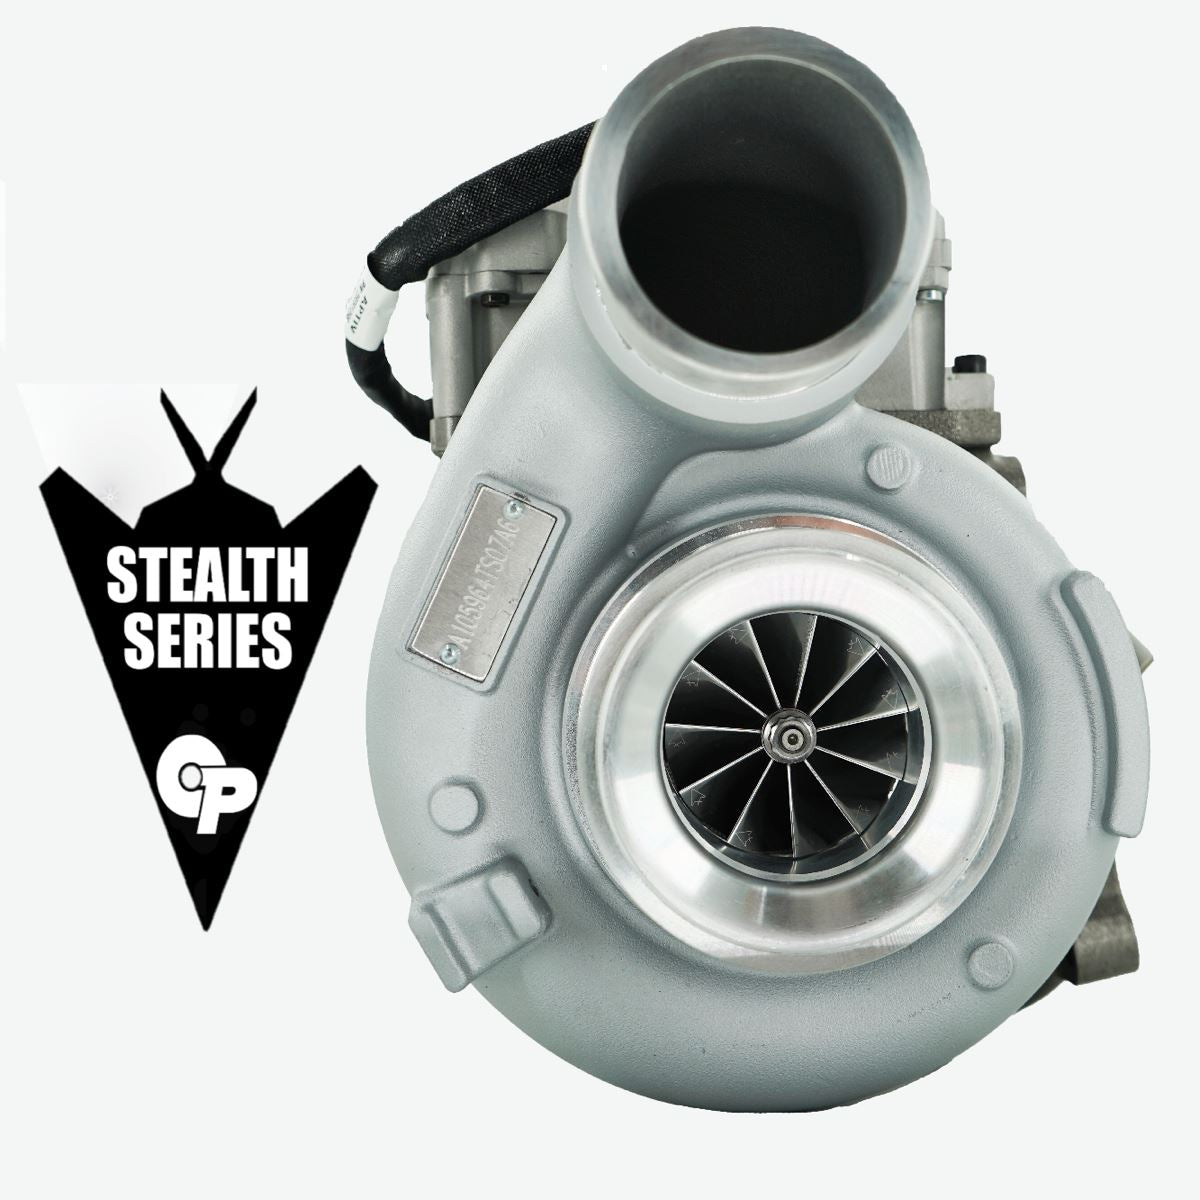 HE351VE Stealth Mach 1 64 Turbo (2007.5-2009 6.7L Cummins) Turbocharger Calibrated Power 